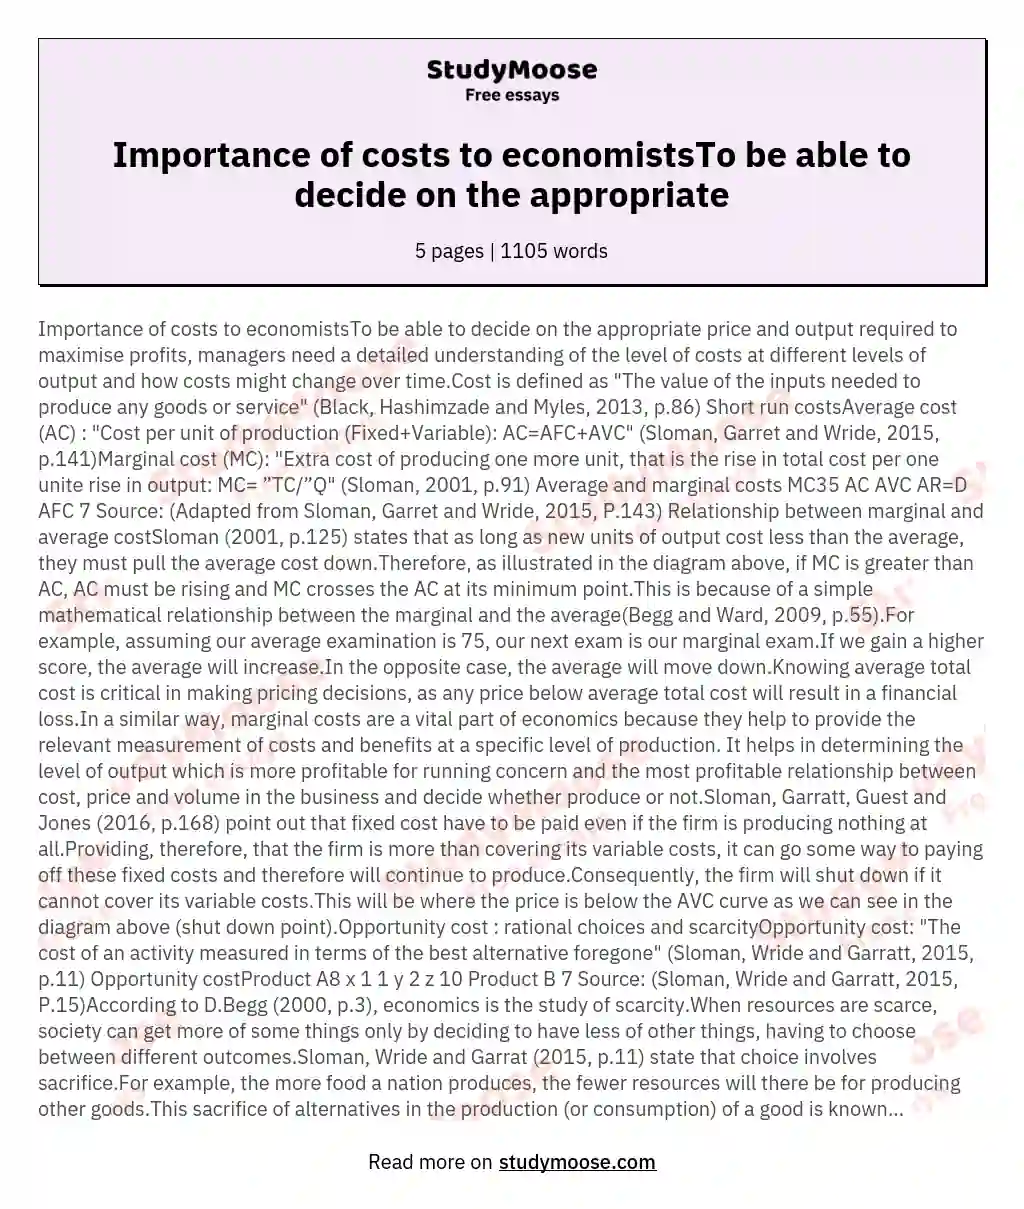 Importance of costs to economistsTo be able to decide on the appropriate